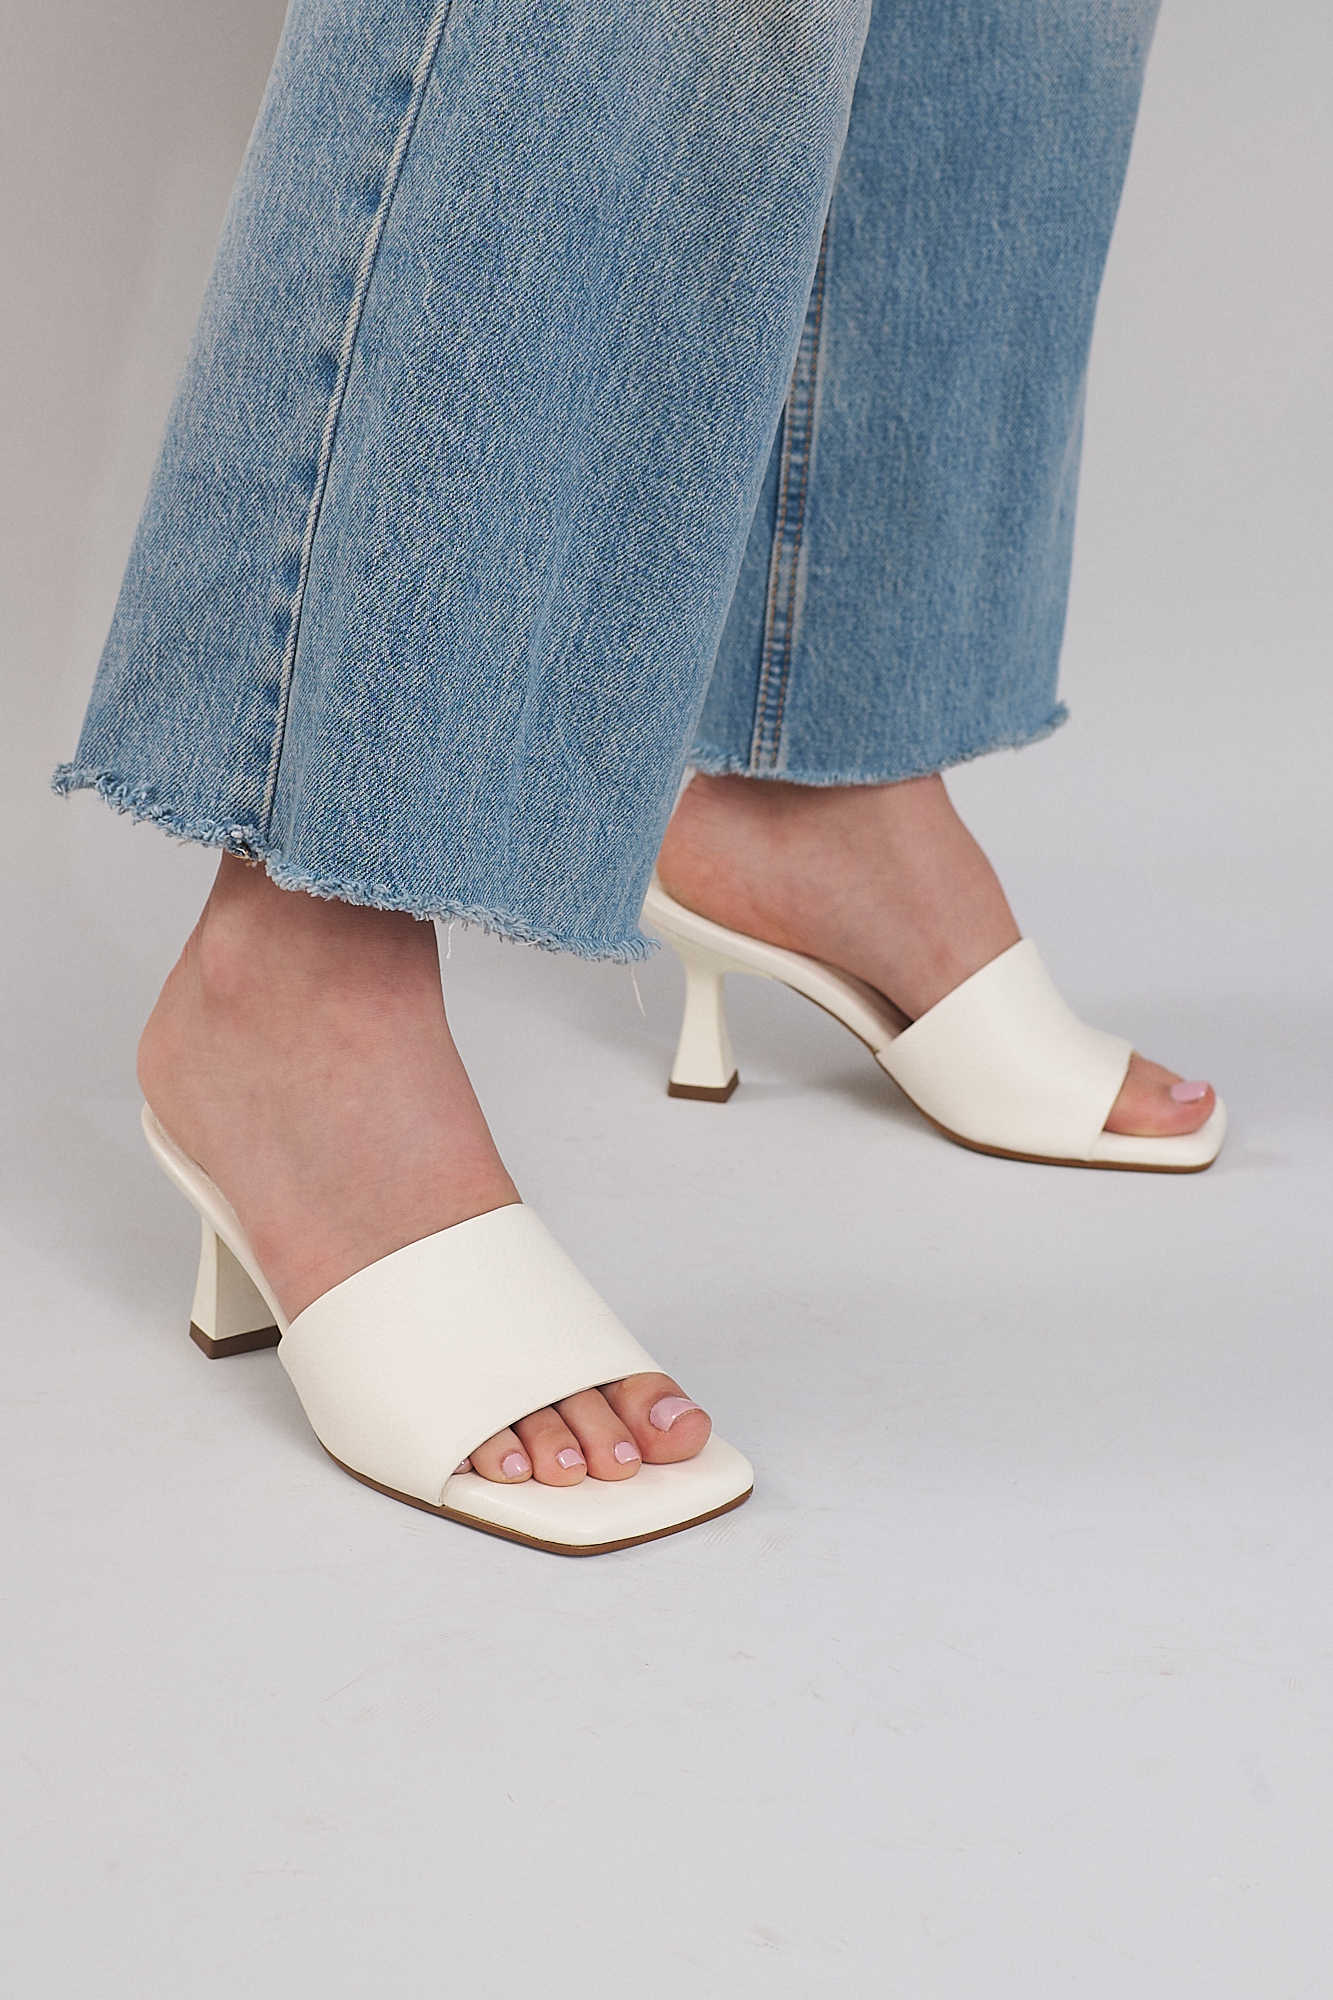 girl with blue jeans wearing white square toe pumps from emilia merz